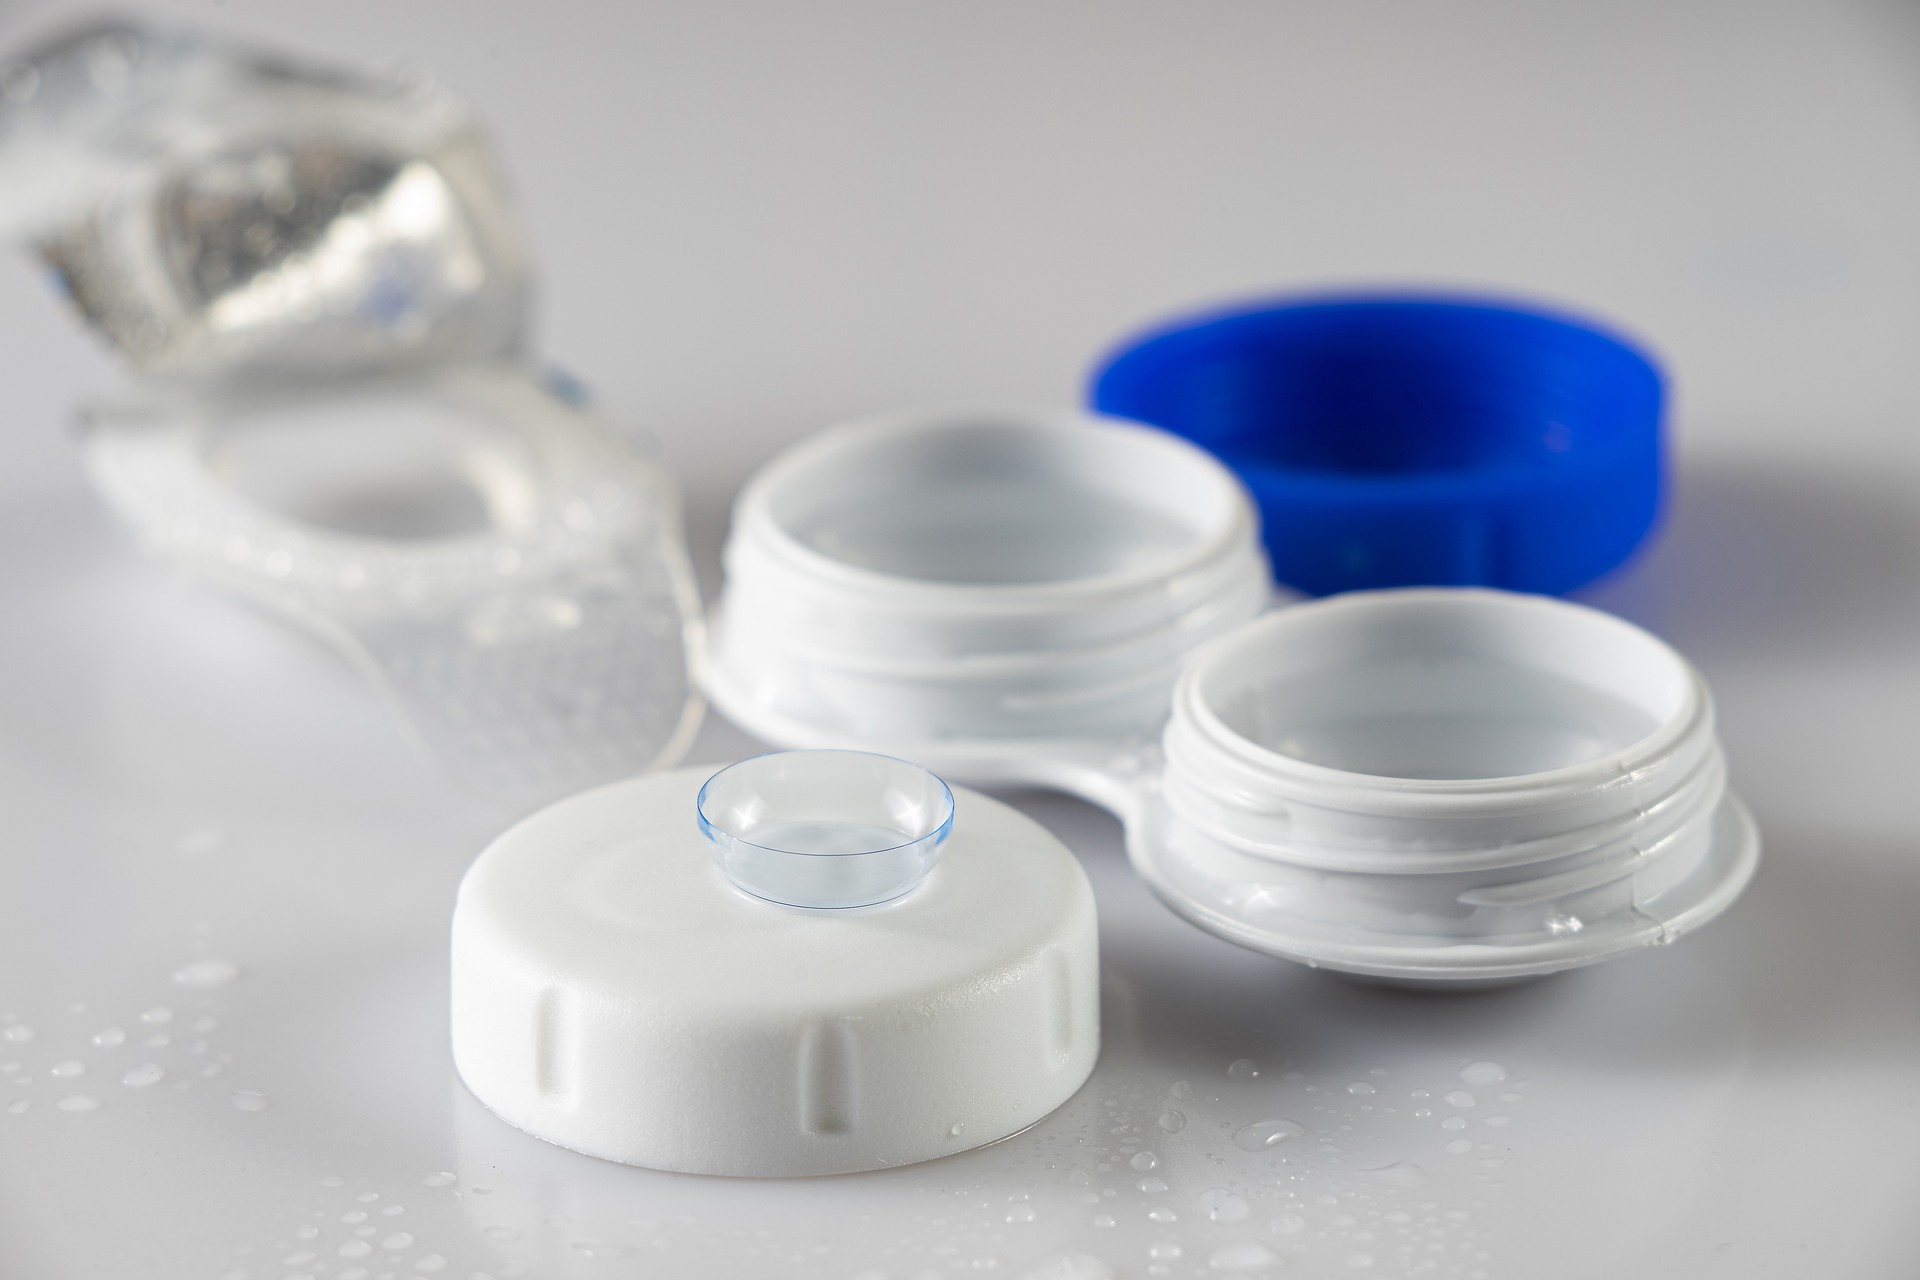 Contact Lenses: Overview & Manufacturing Process